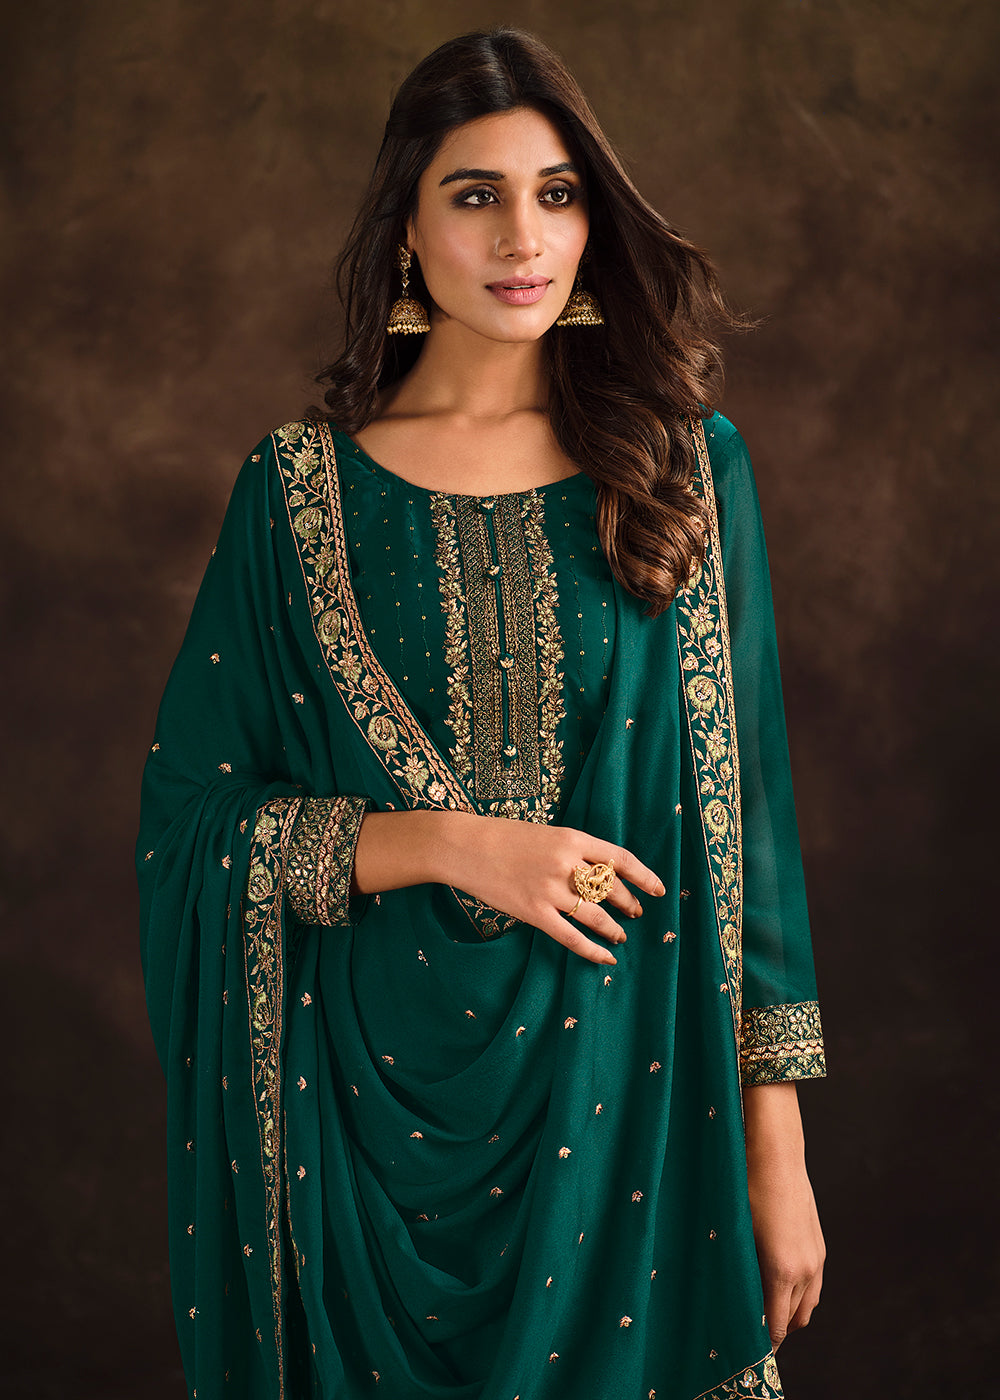 Buy Now Fancy Georgette Trendy Teal Green Pakistani Style Salwar Suit Online in USA, UK, Canada, Germany, Australia & Worldwide at Empress Clothing.